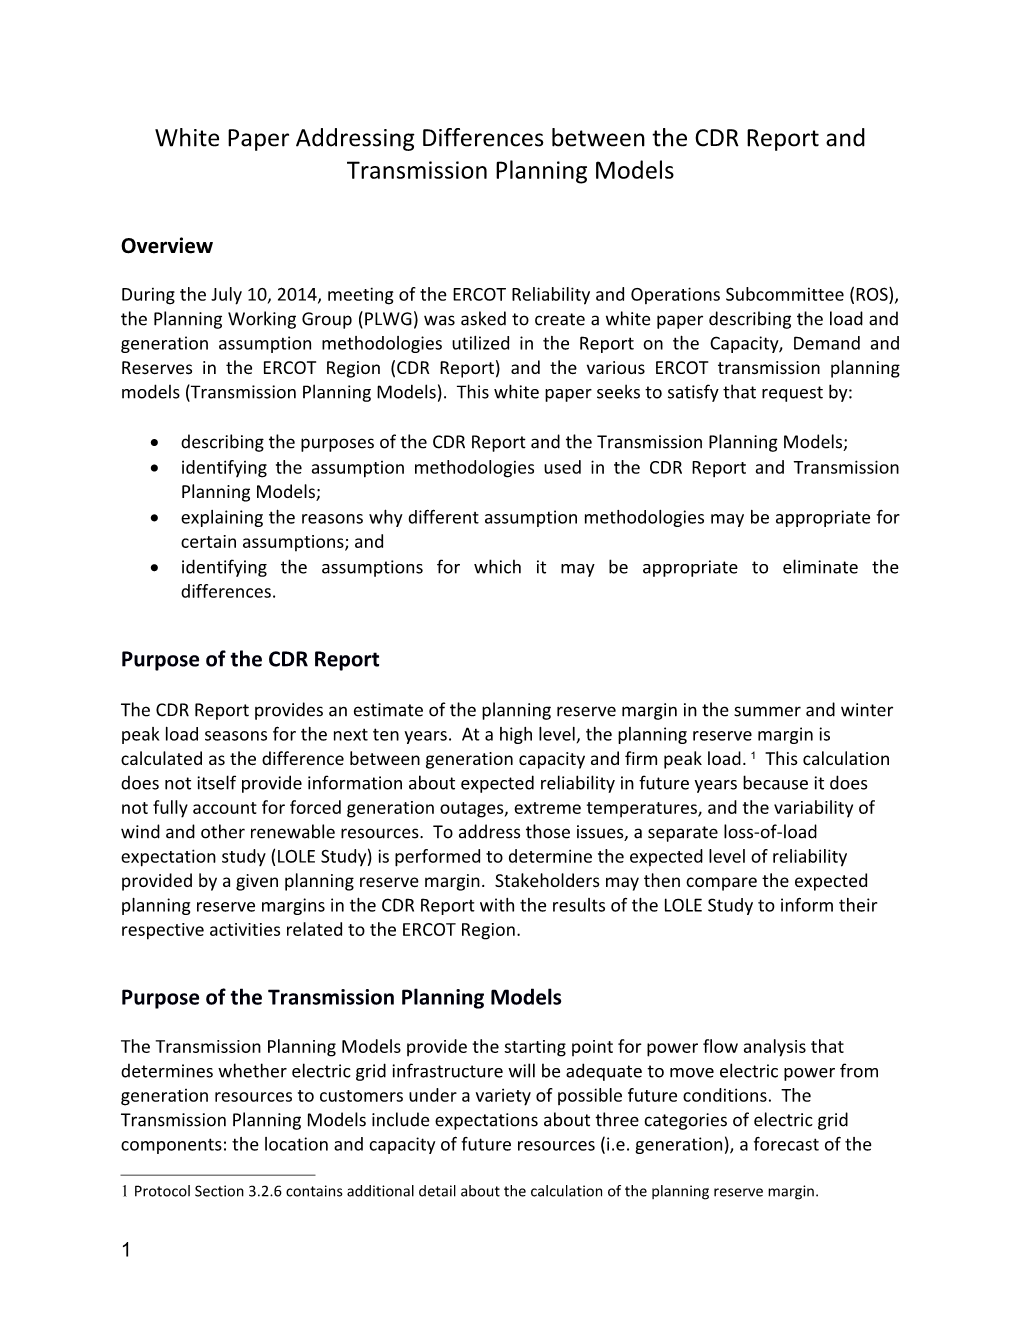 White Paper Addressing Differences Between the CDR Report and Transmission Planning Models